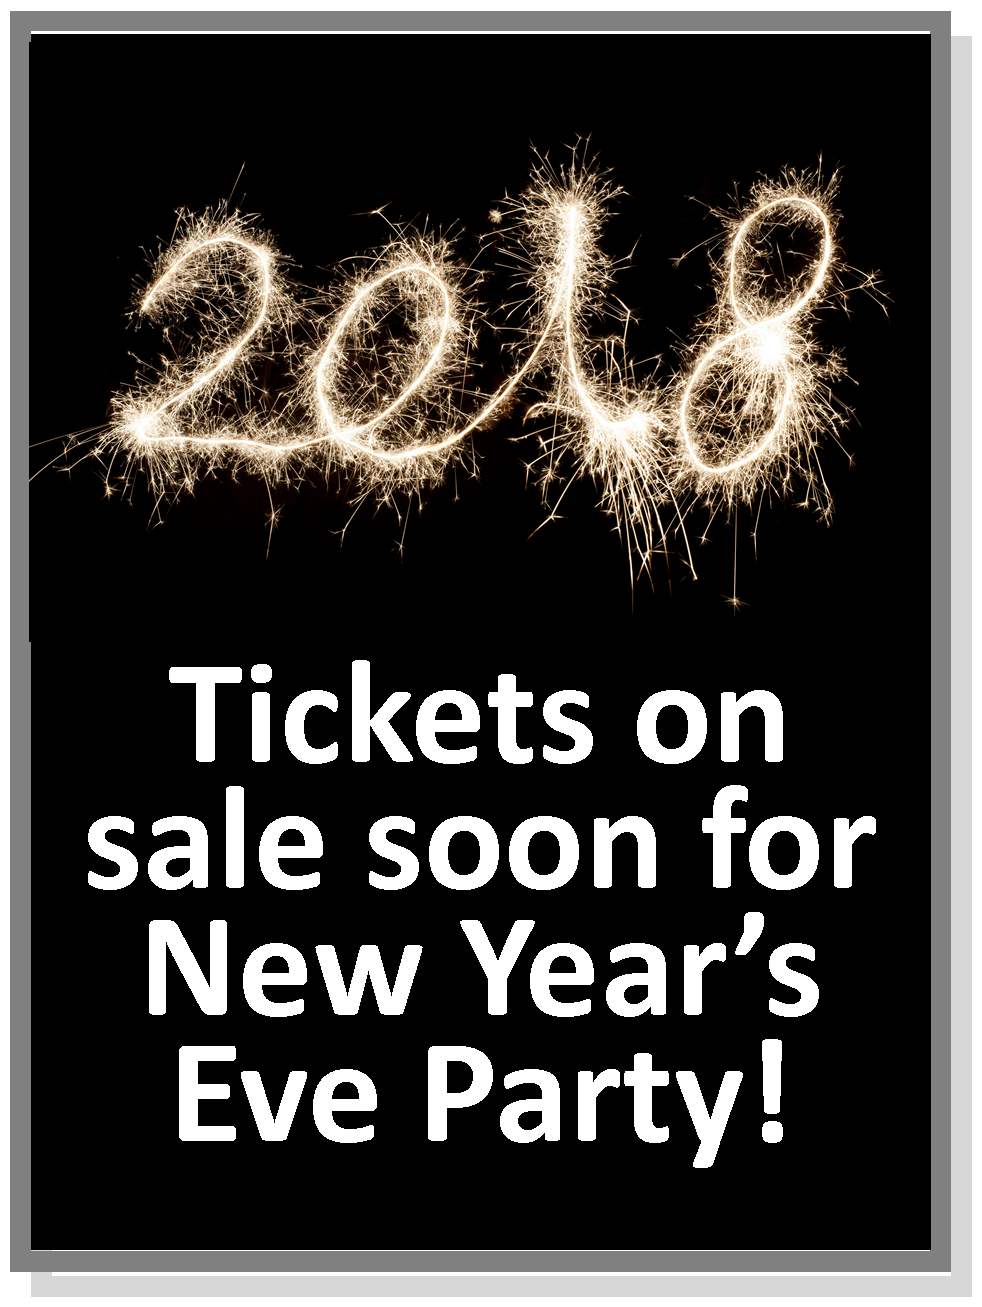 New Years Eve 2018 Parties Ideas & Ball Entertainment Bash Activities